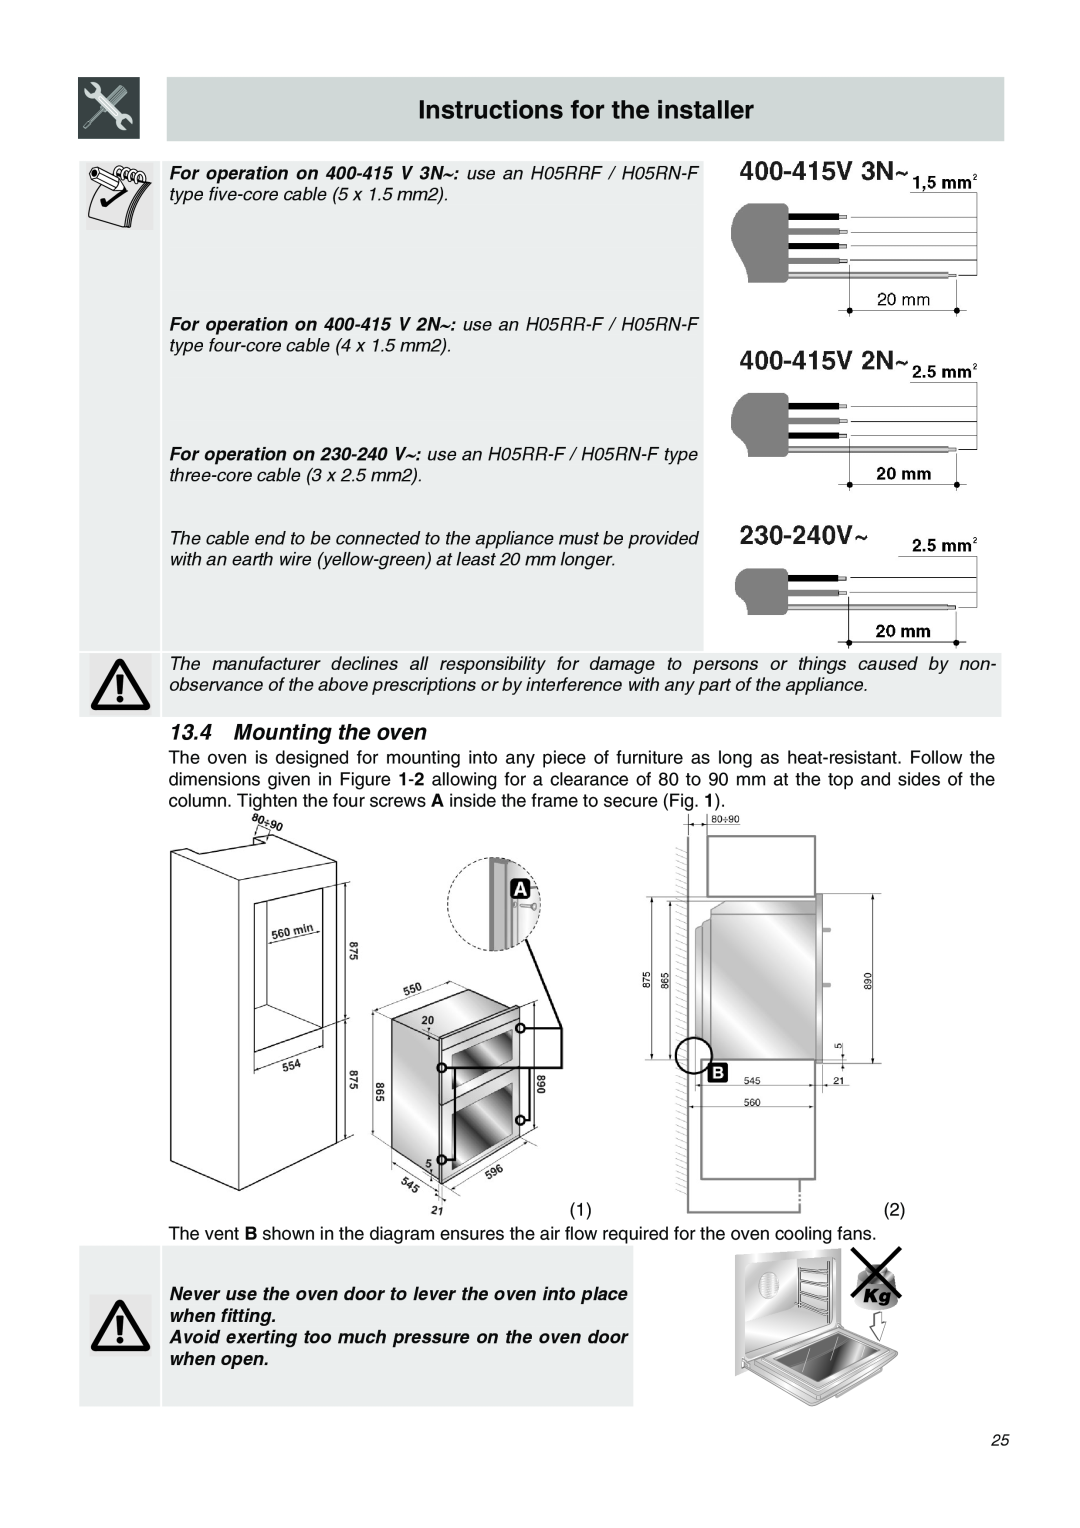 Smeg SDO10 Mounting the oven, Instructions for the installer, Avoid exerting too much pressure on the oven door when open 